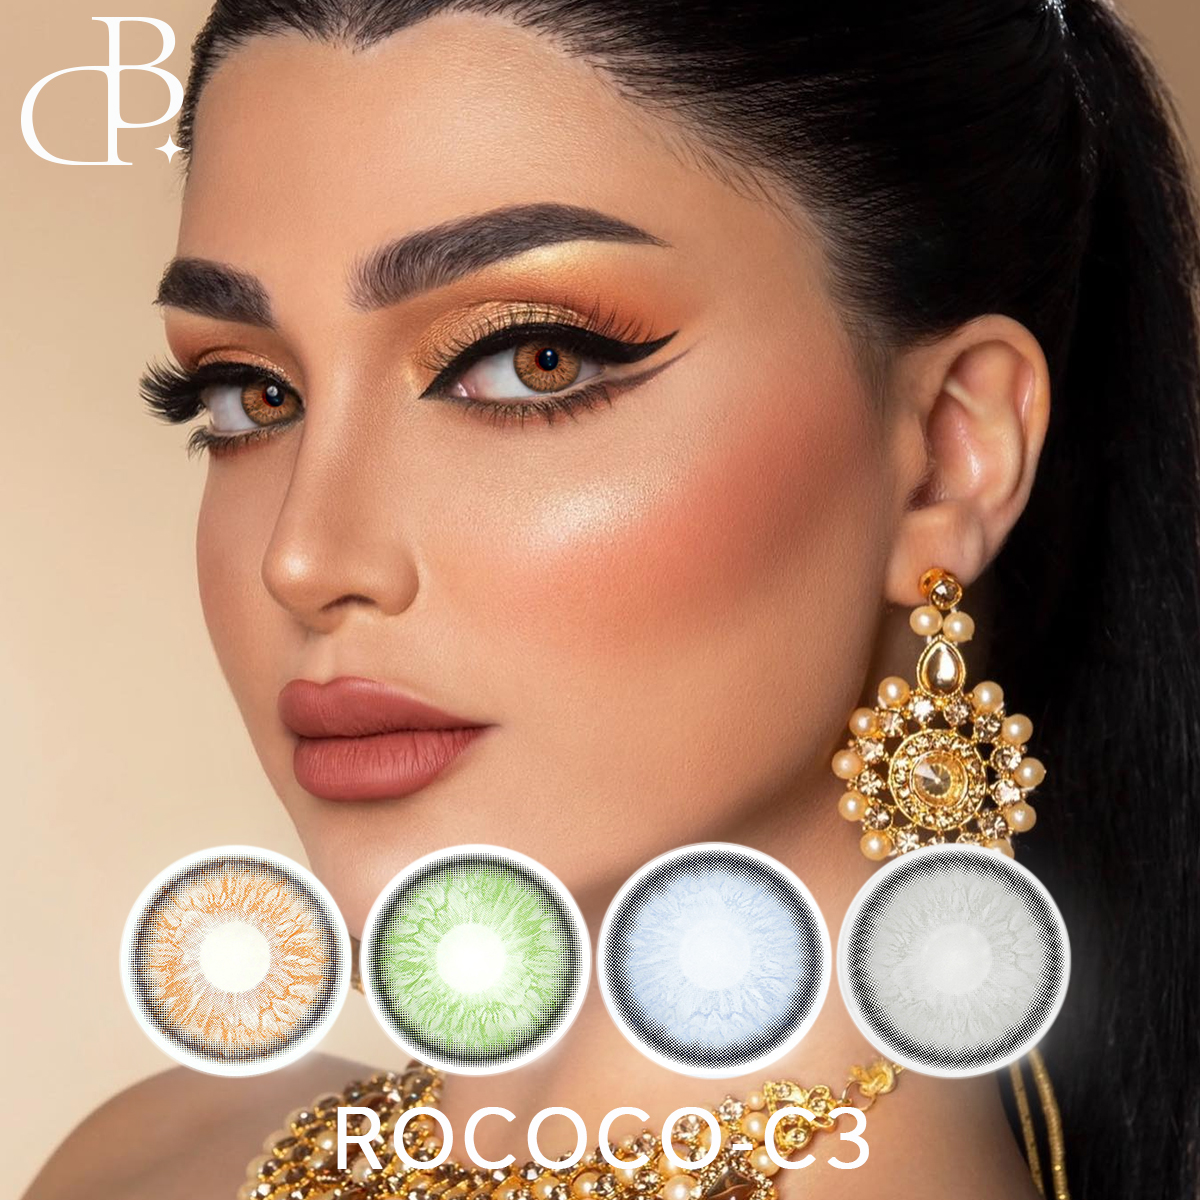 https://www.dblenses.com/rococo-3-new- Looking-cosmetic-wholesale-color-contact-lens-cheap-soft-yearly-eye-colored-contact-lenses-product/